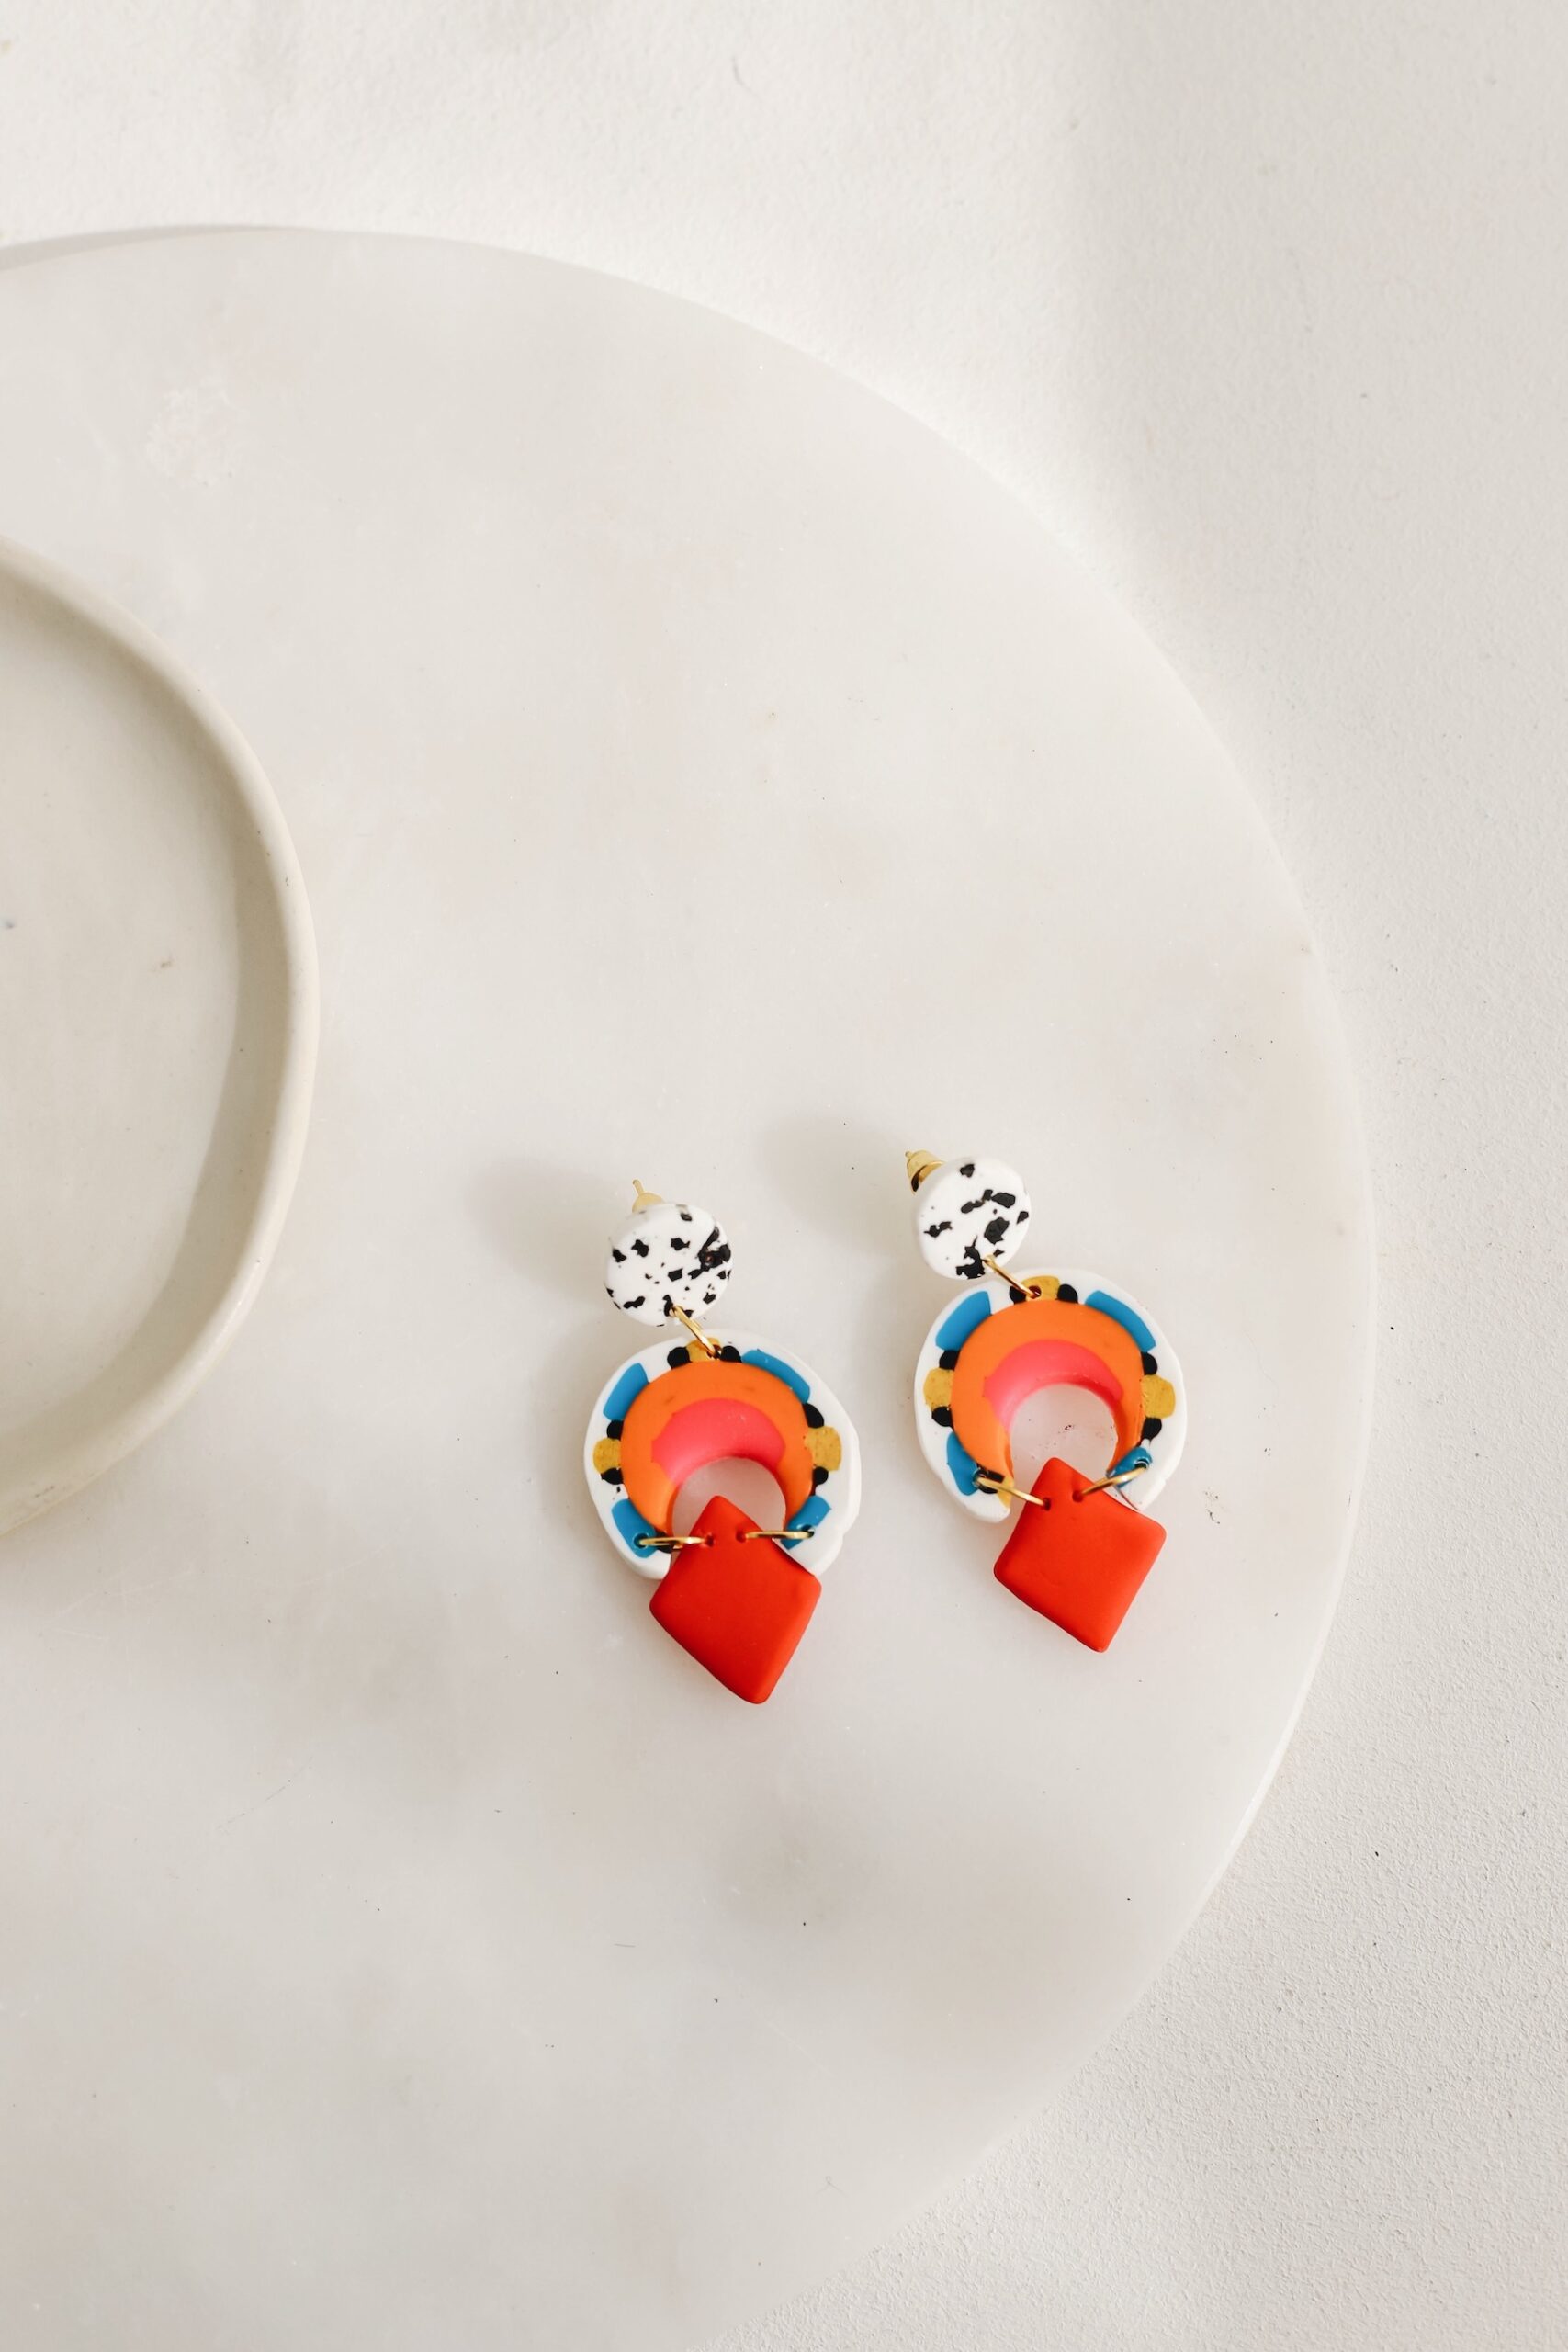 Ada is an earring was designed by a handmade woman designer. It was made of clay